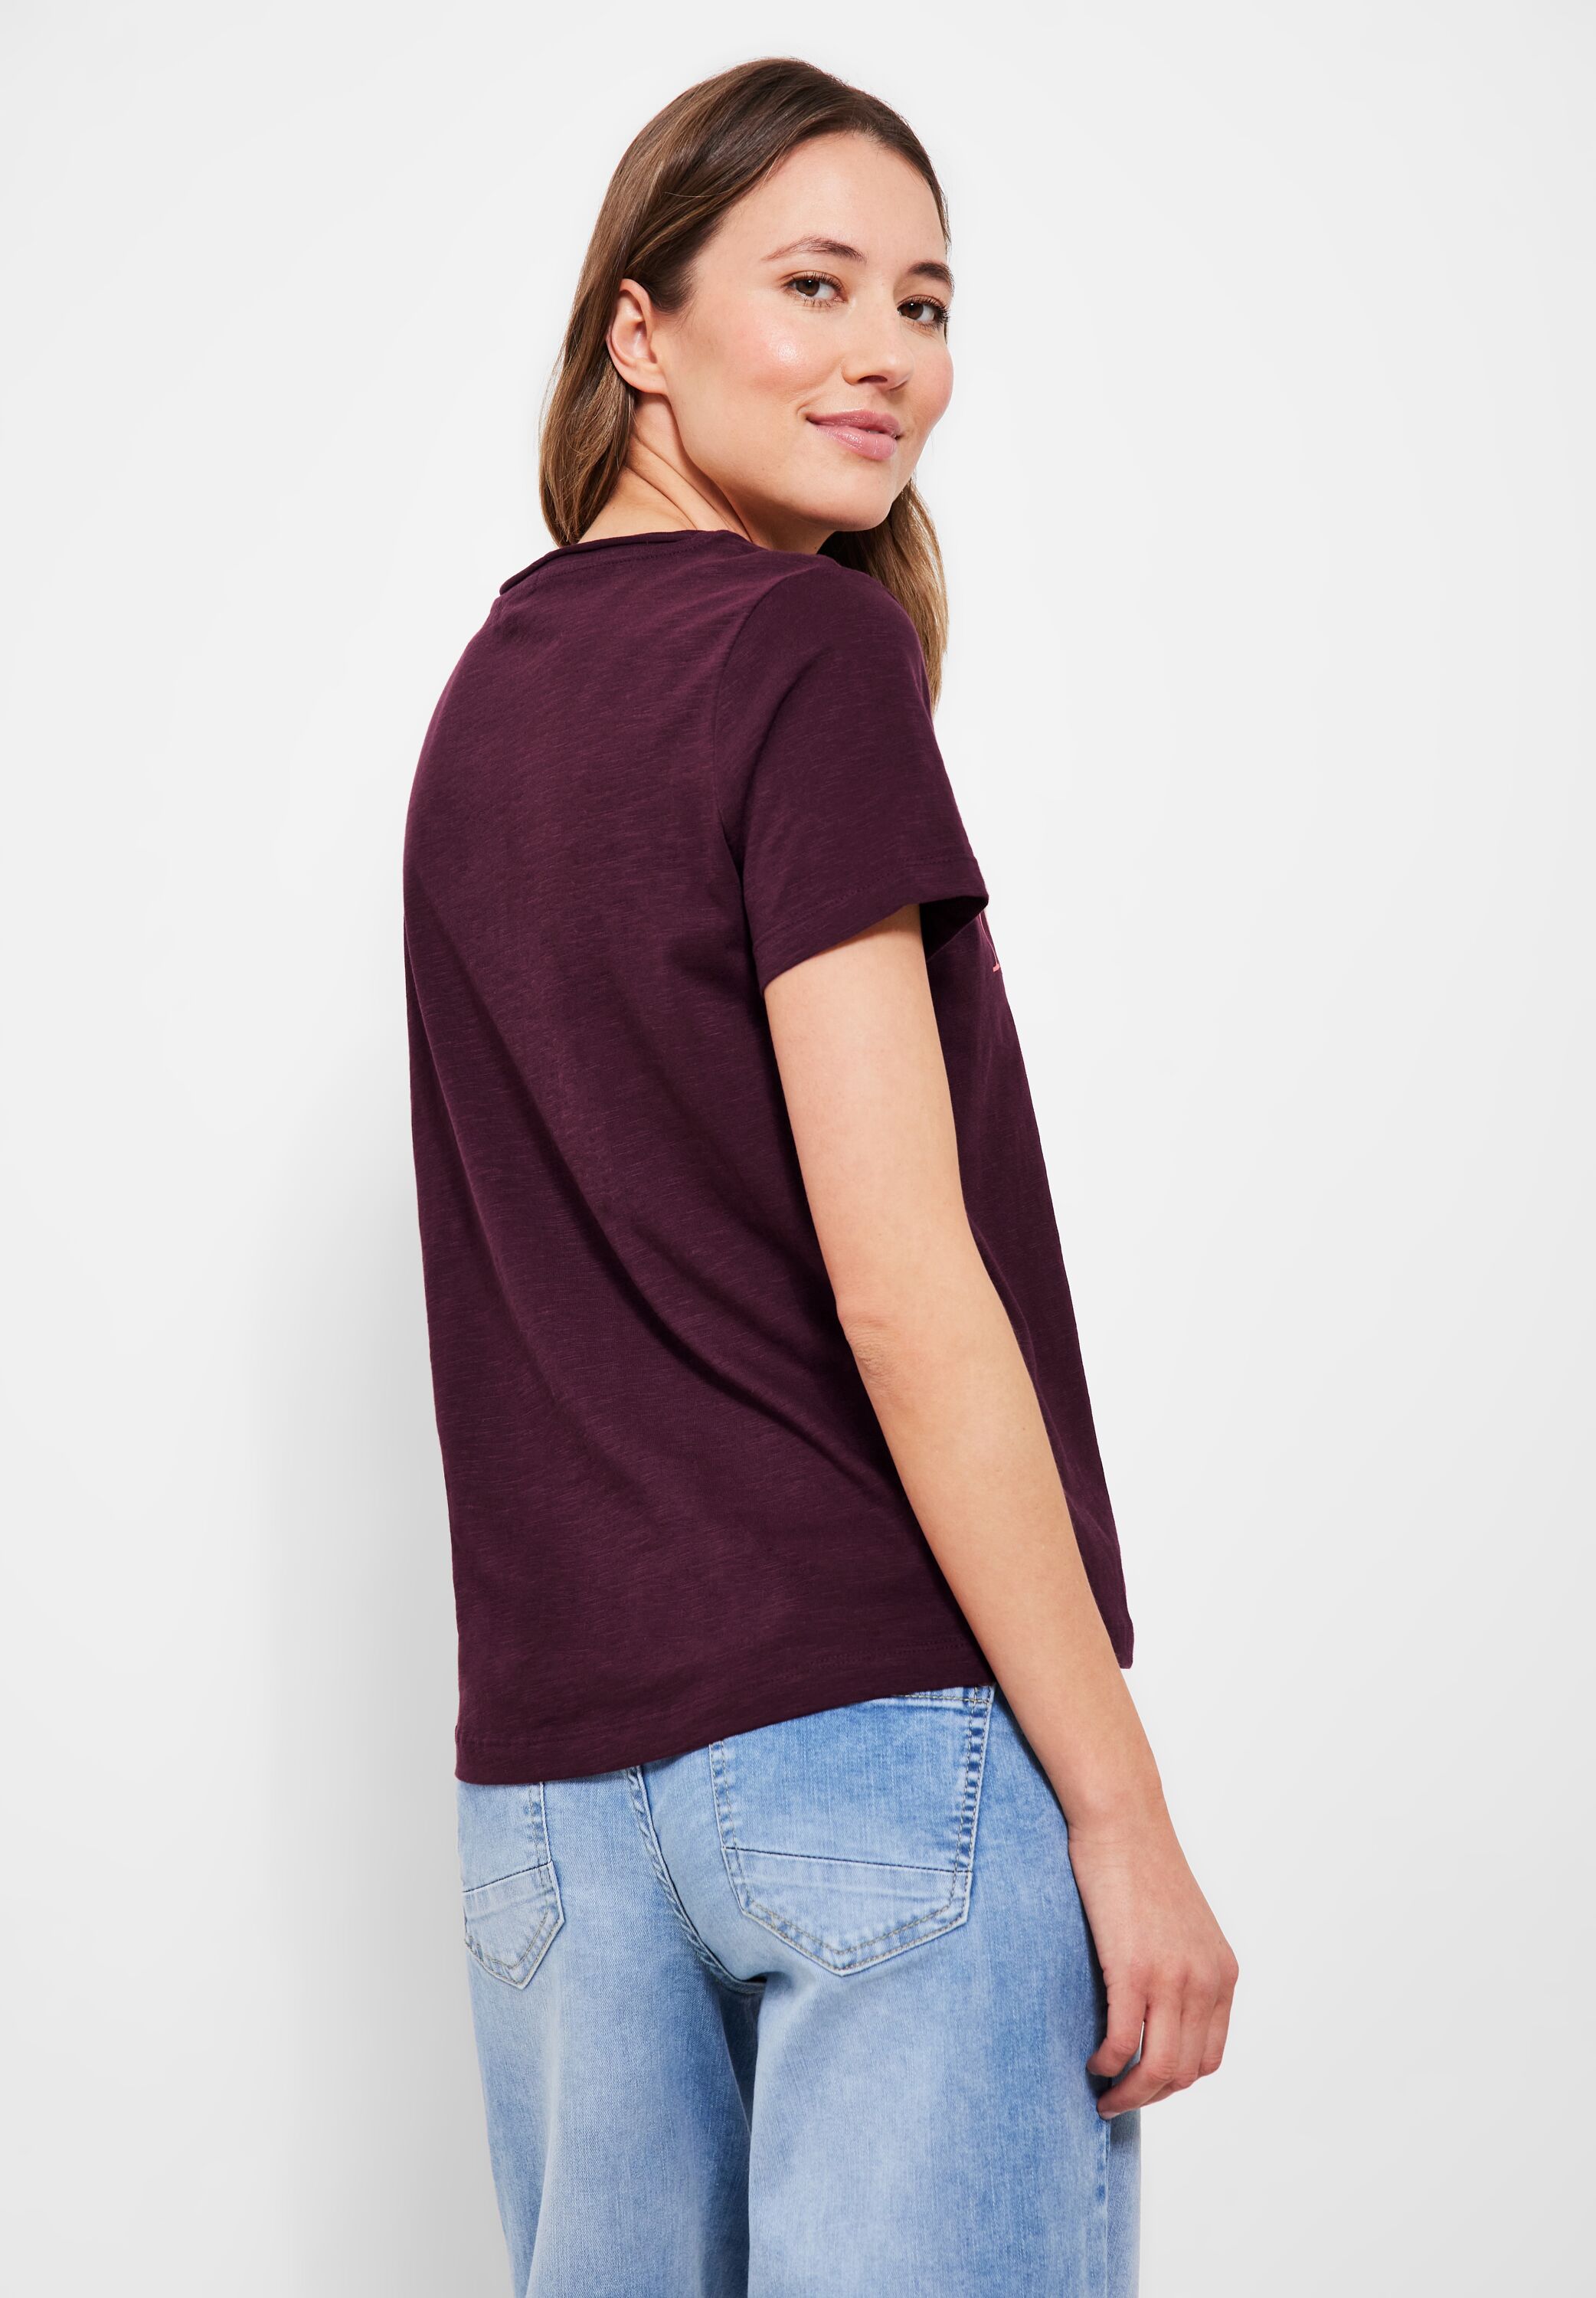 CECIL T-Shirt in Wineberry SALE reduziert - Red im B319637-34918 CONCEPT Mode